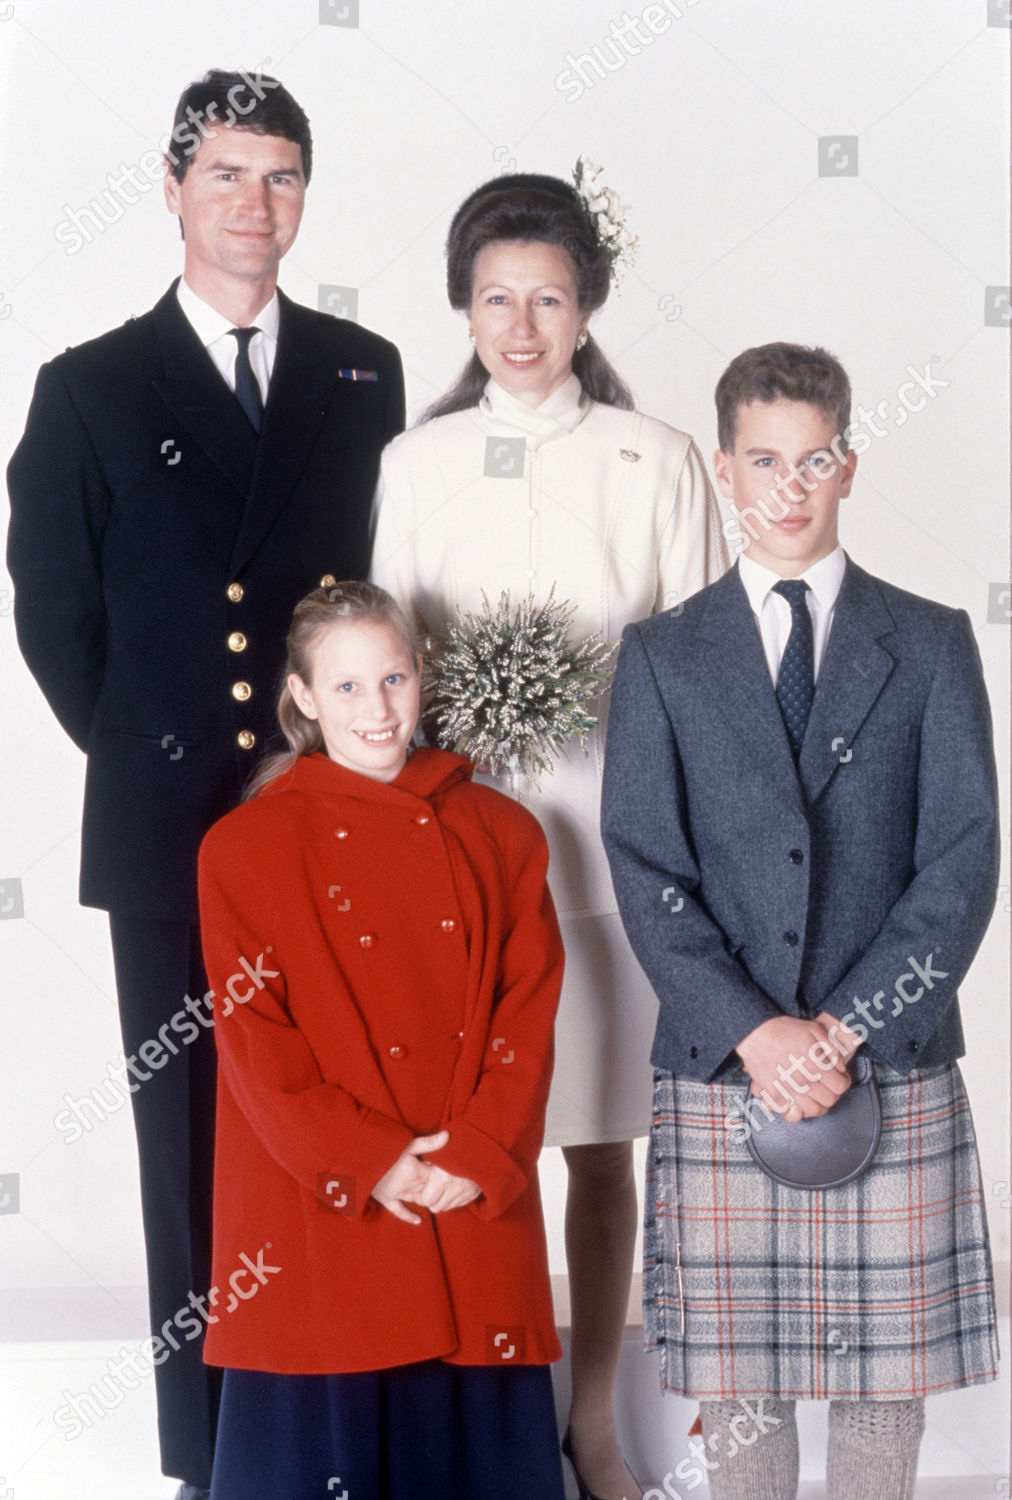 wedding-of-princess-anne-and-timothy-laurence-at-the-crathie-church-balmoral-scotland-1992-shutterstock-editorial-209035k.jpg